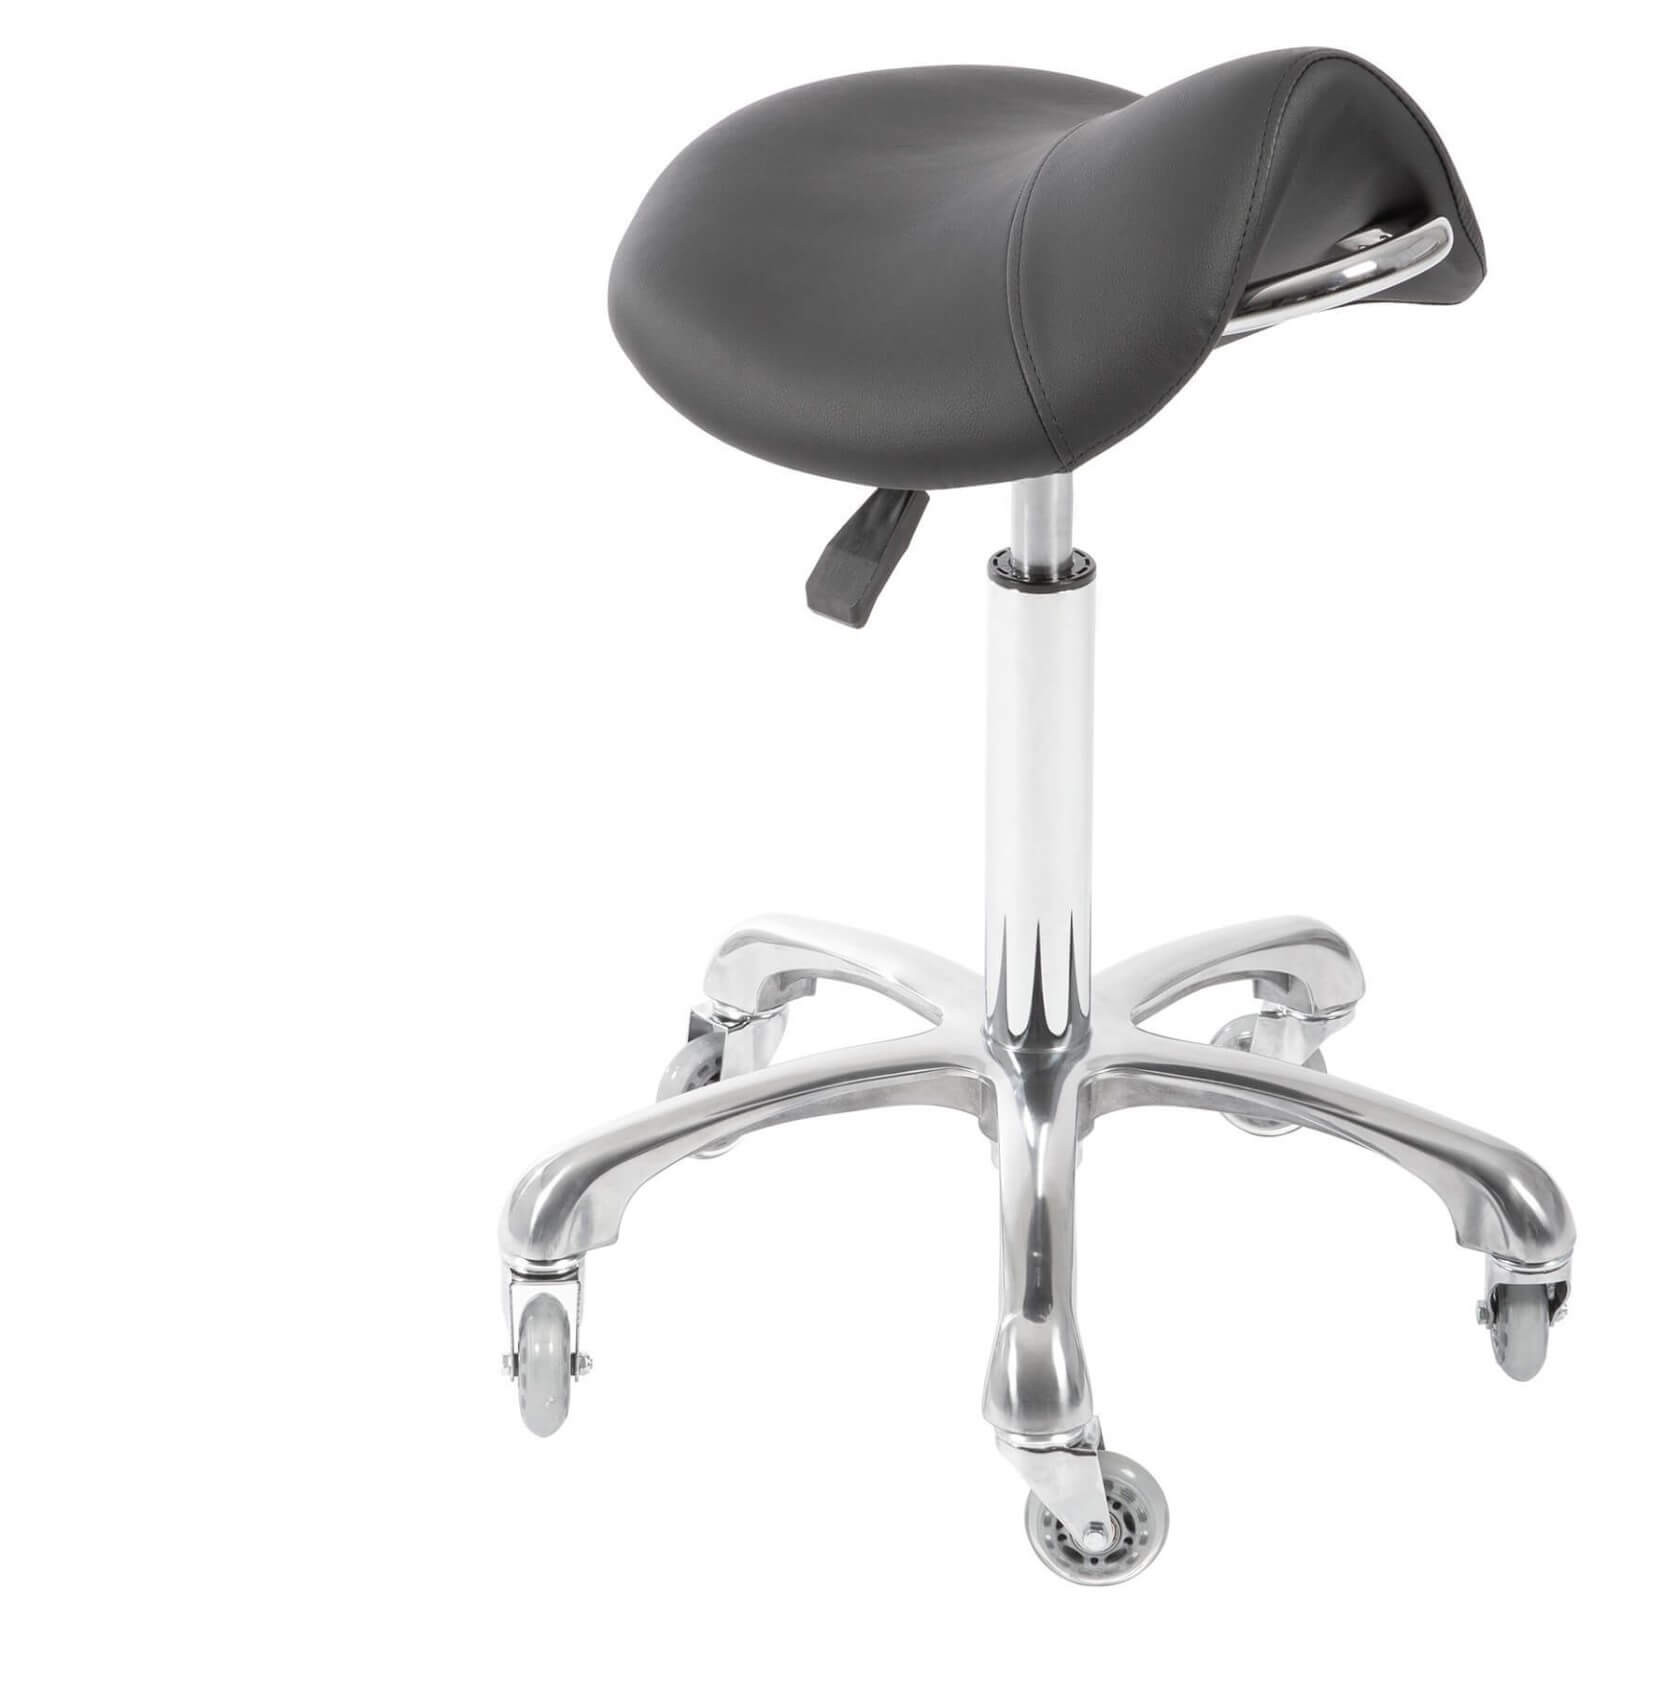 https://www.gloriouspro-beaute.com/582/tabouret-professionnel-coiffeur-institut-spa-5-roues-silicone.jpg